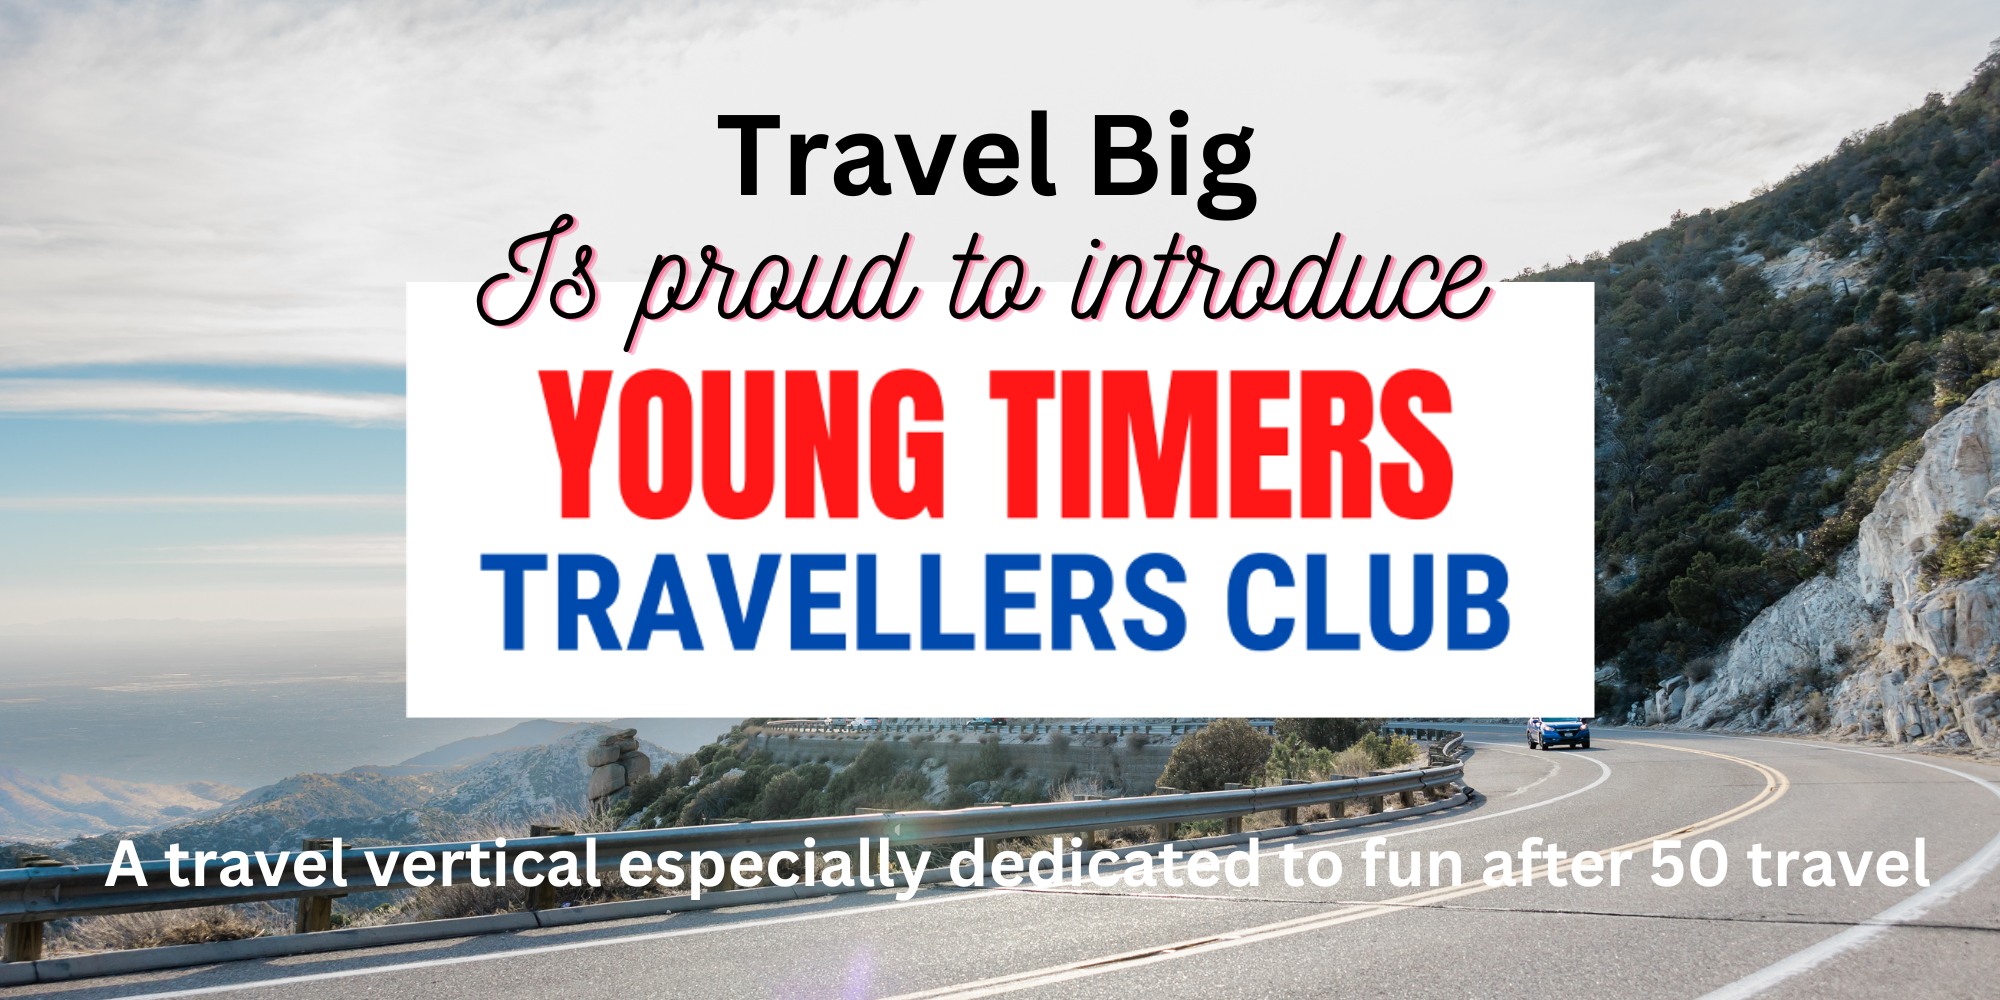 www.recreationalsportz.com/young-timers-travellers-club/